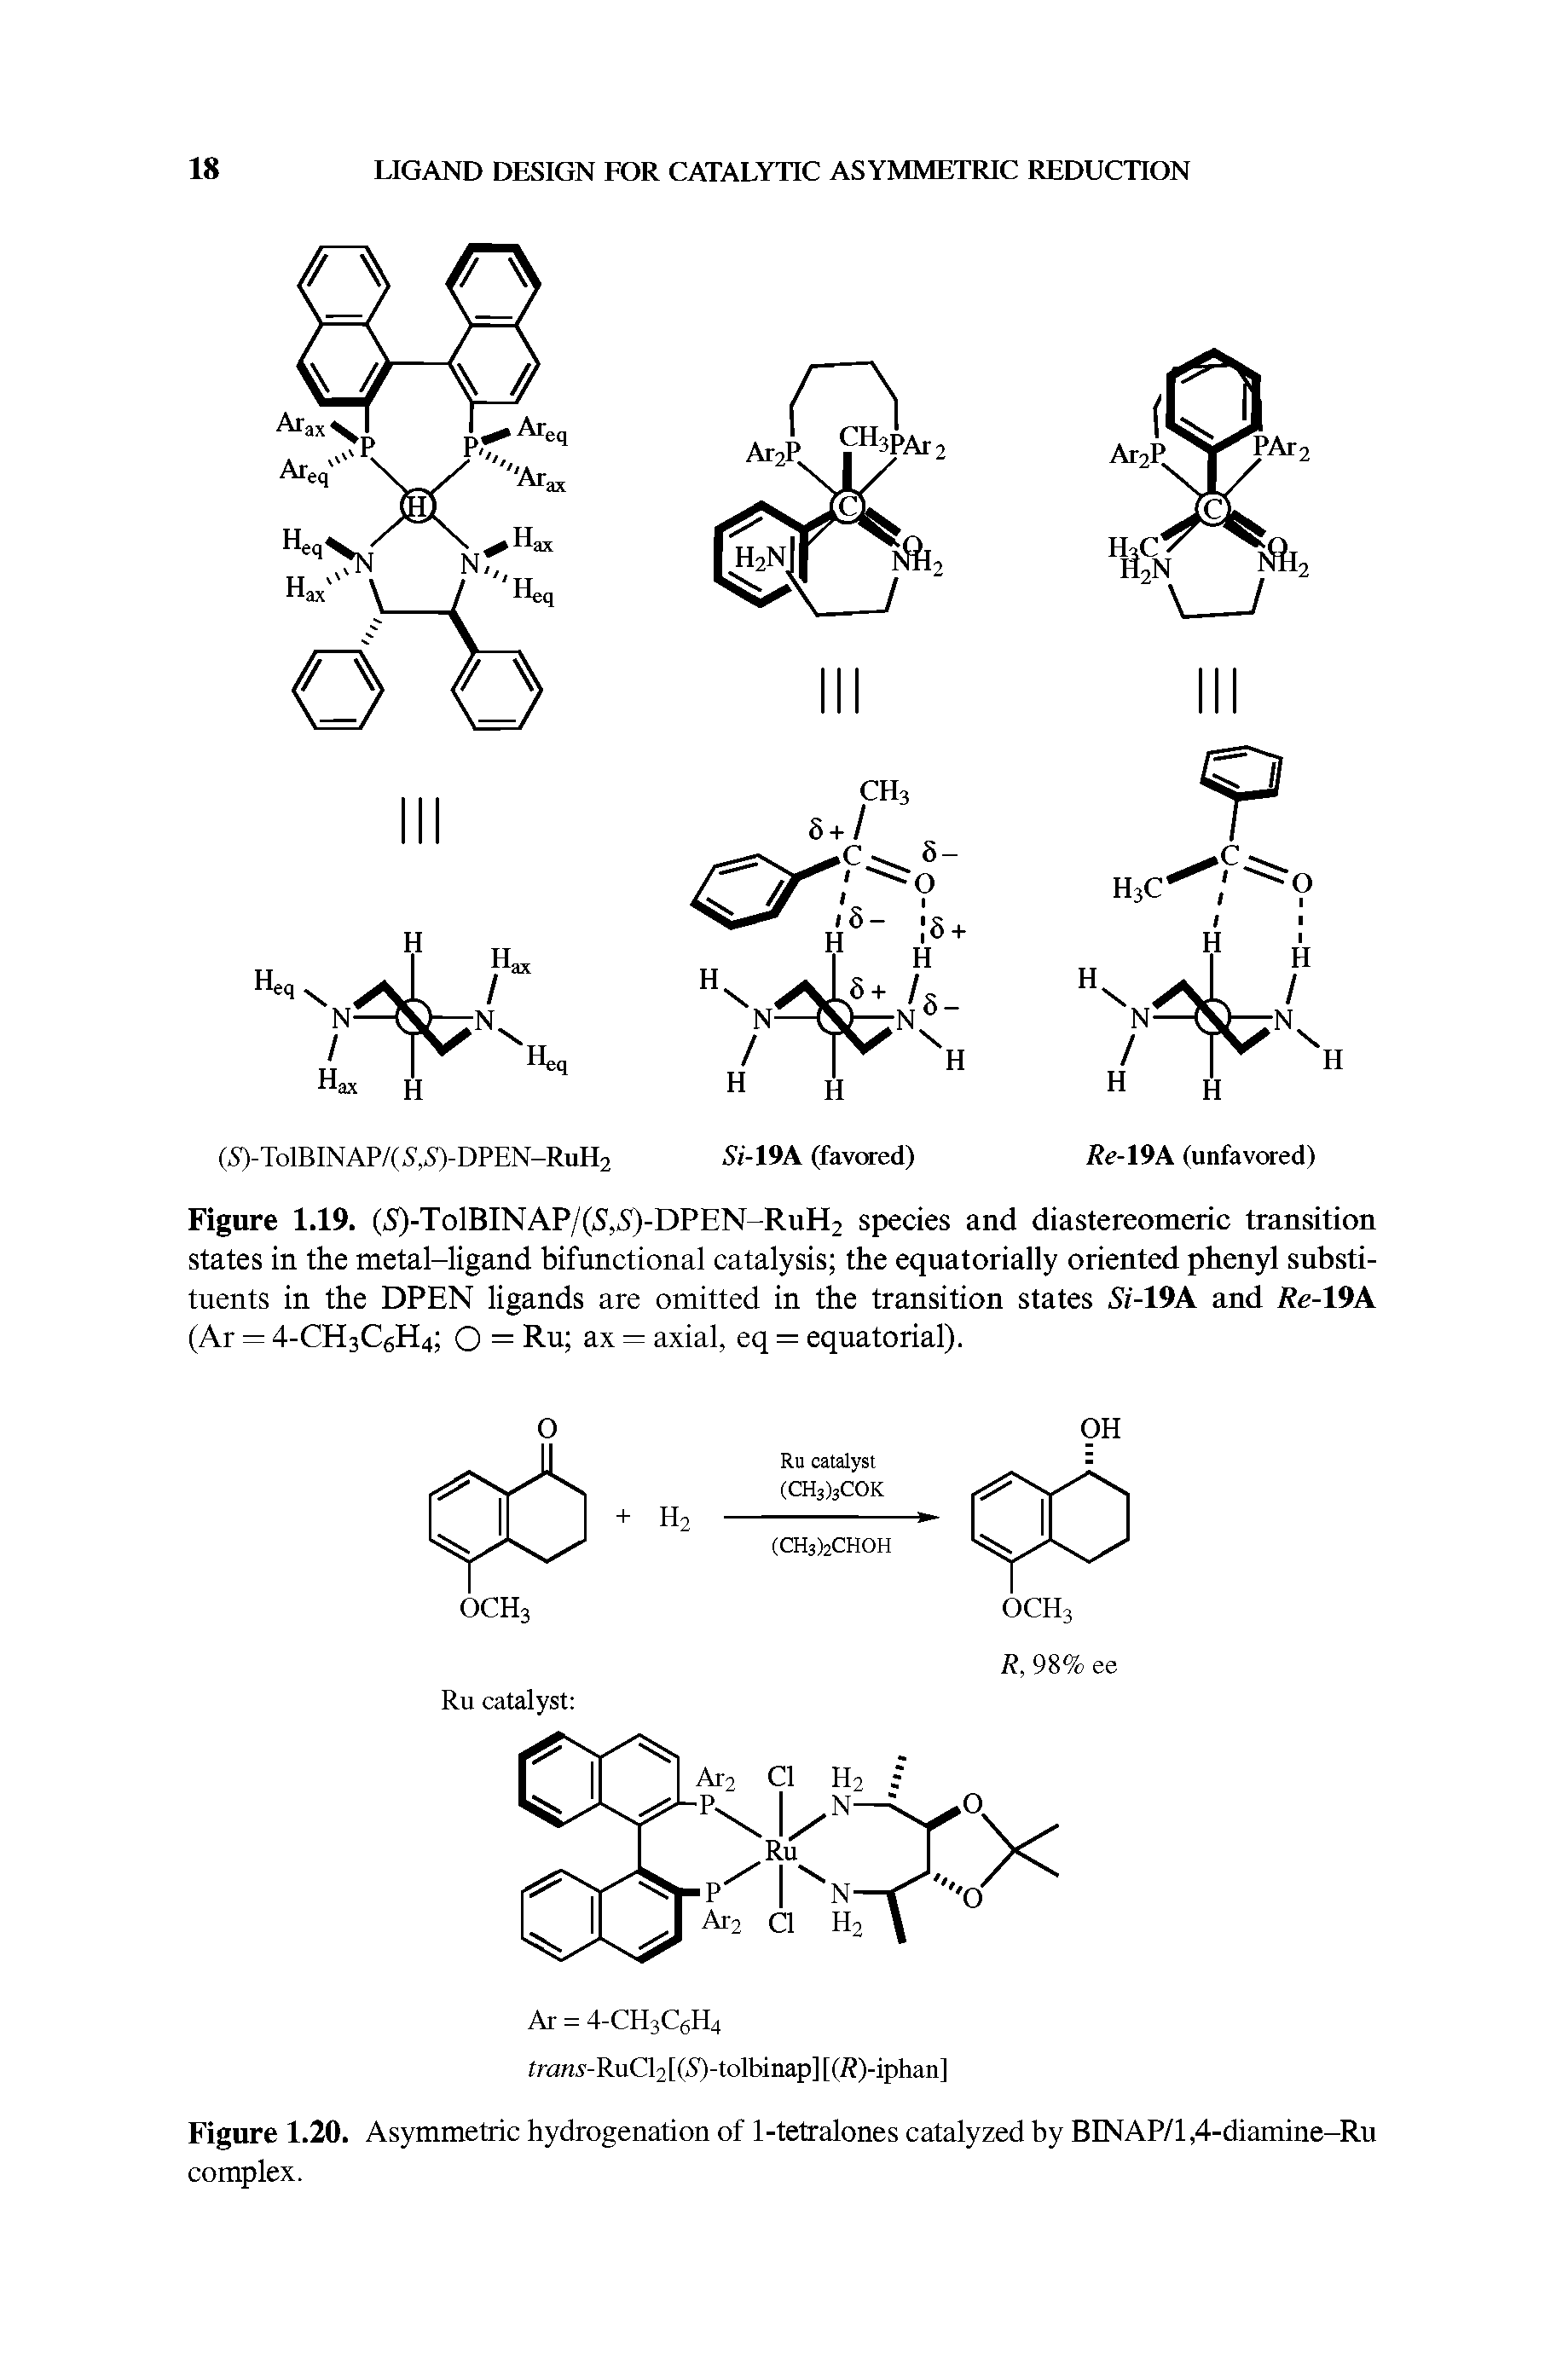 Figure 1.19. (5)-TolBINAP/(5,5 )-DPEN-RuH2 species and diastereomeric transition states in the metal-ligand bifunctional catalysis the equatorially oriented phenyl substituents in the DPEN ligands are omitted in the transition states 5 -19A and Re-19A (Ar = 4-CH3C6H4 O = Ru ax = axial, eq = equatorial).